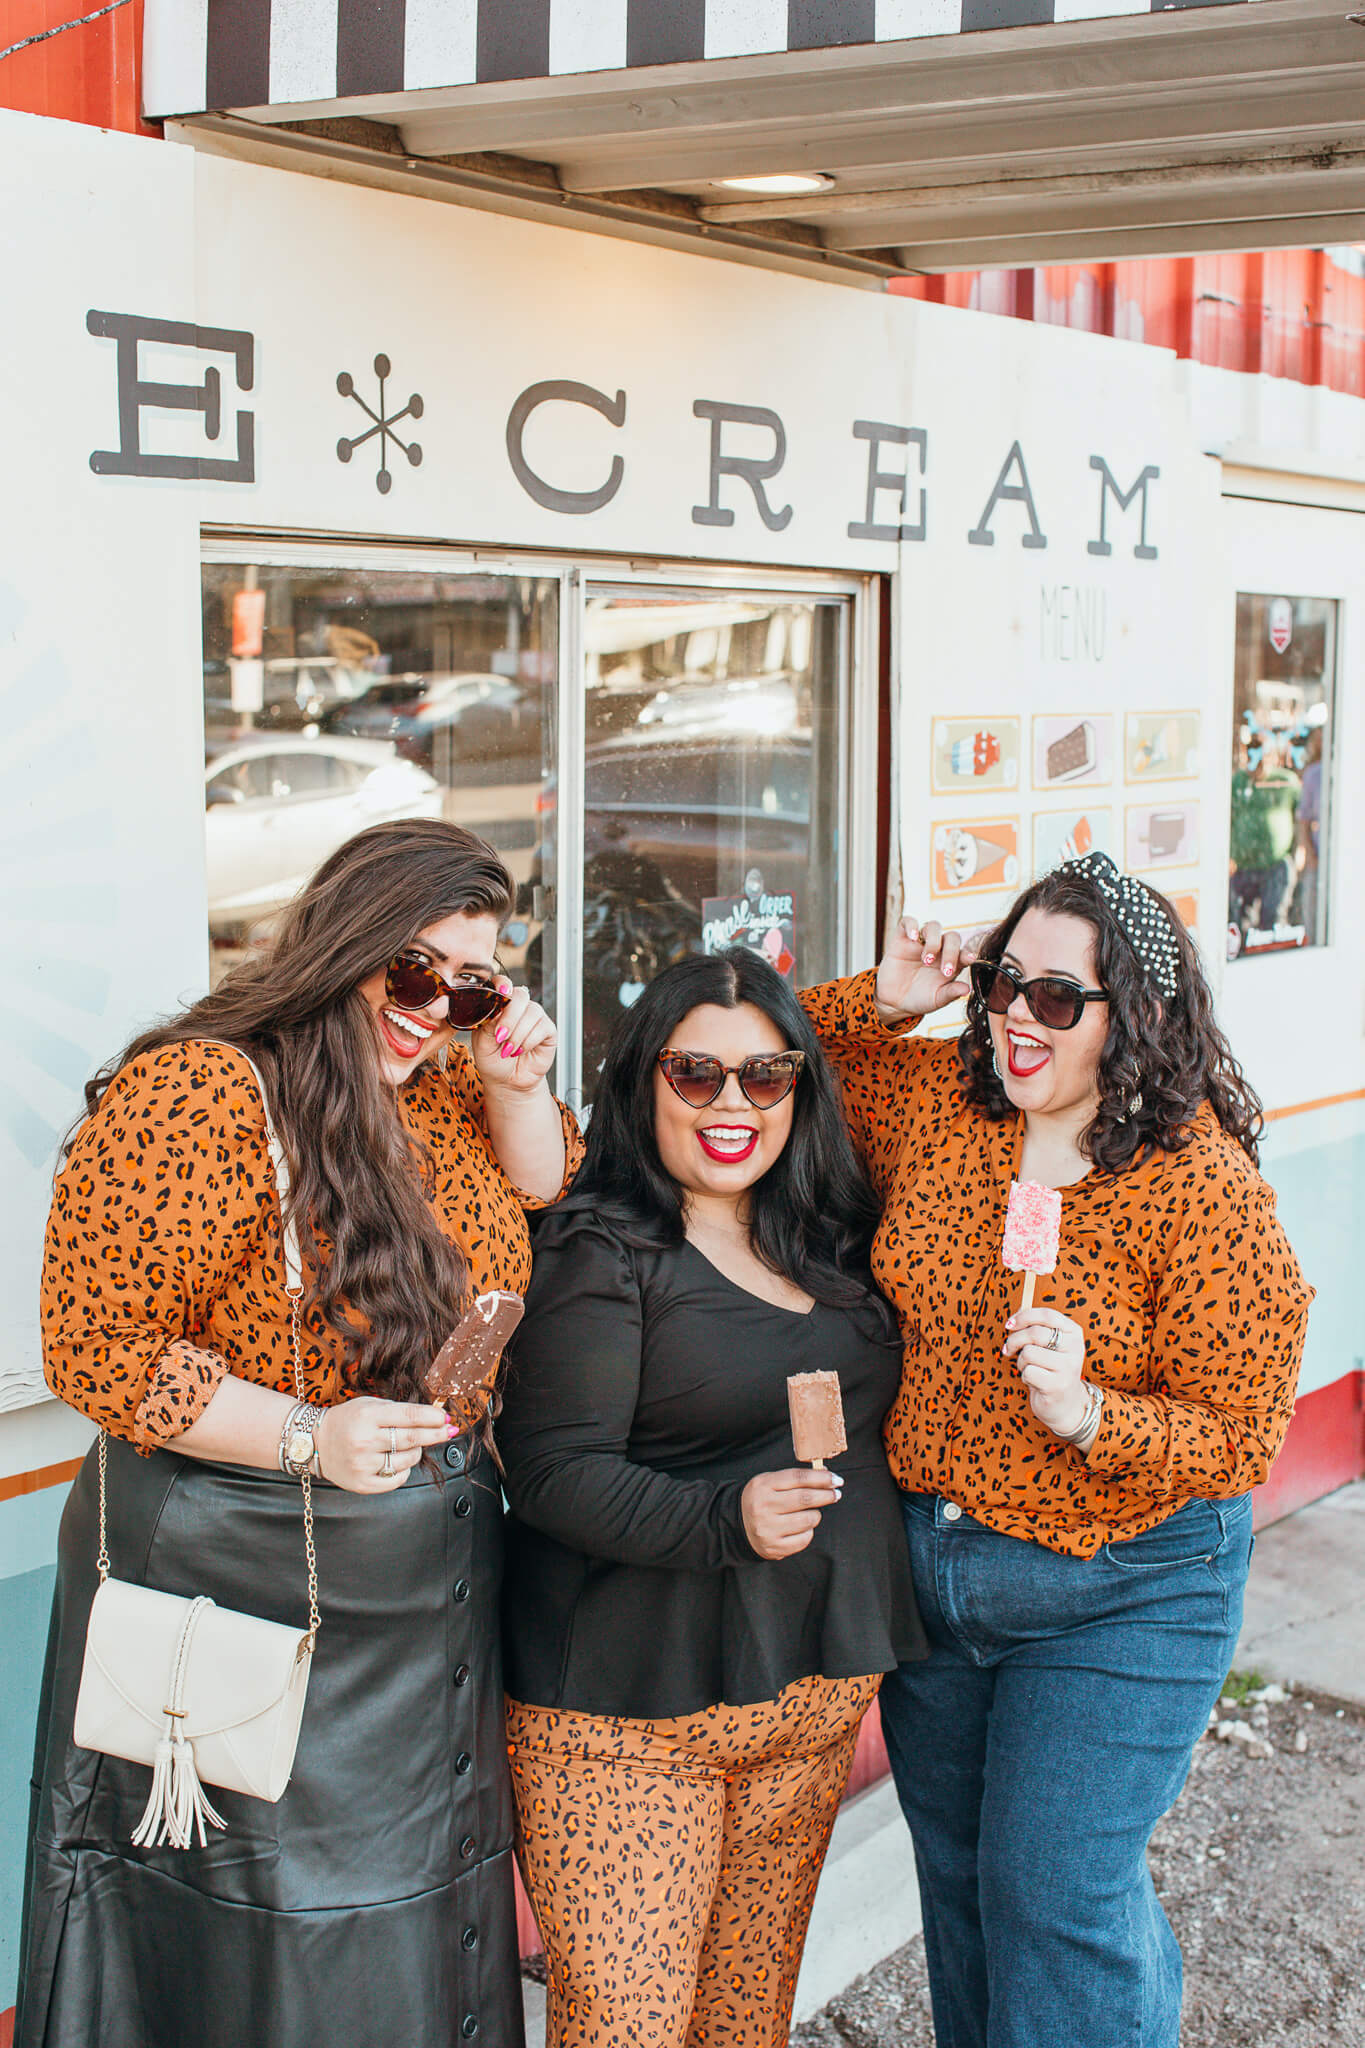 Plus size cheetah outfits 